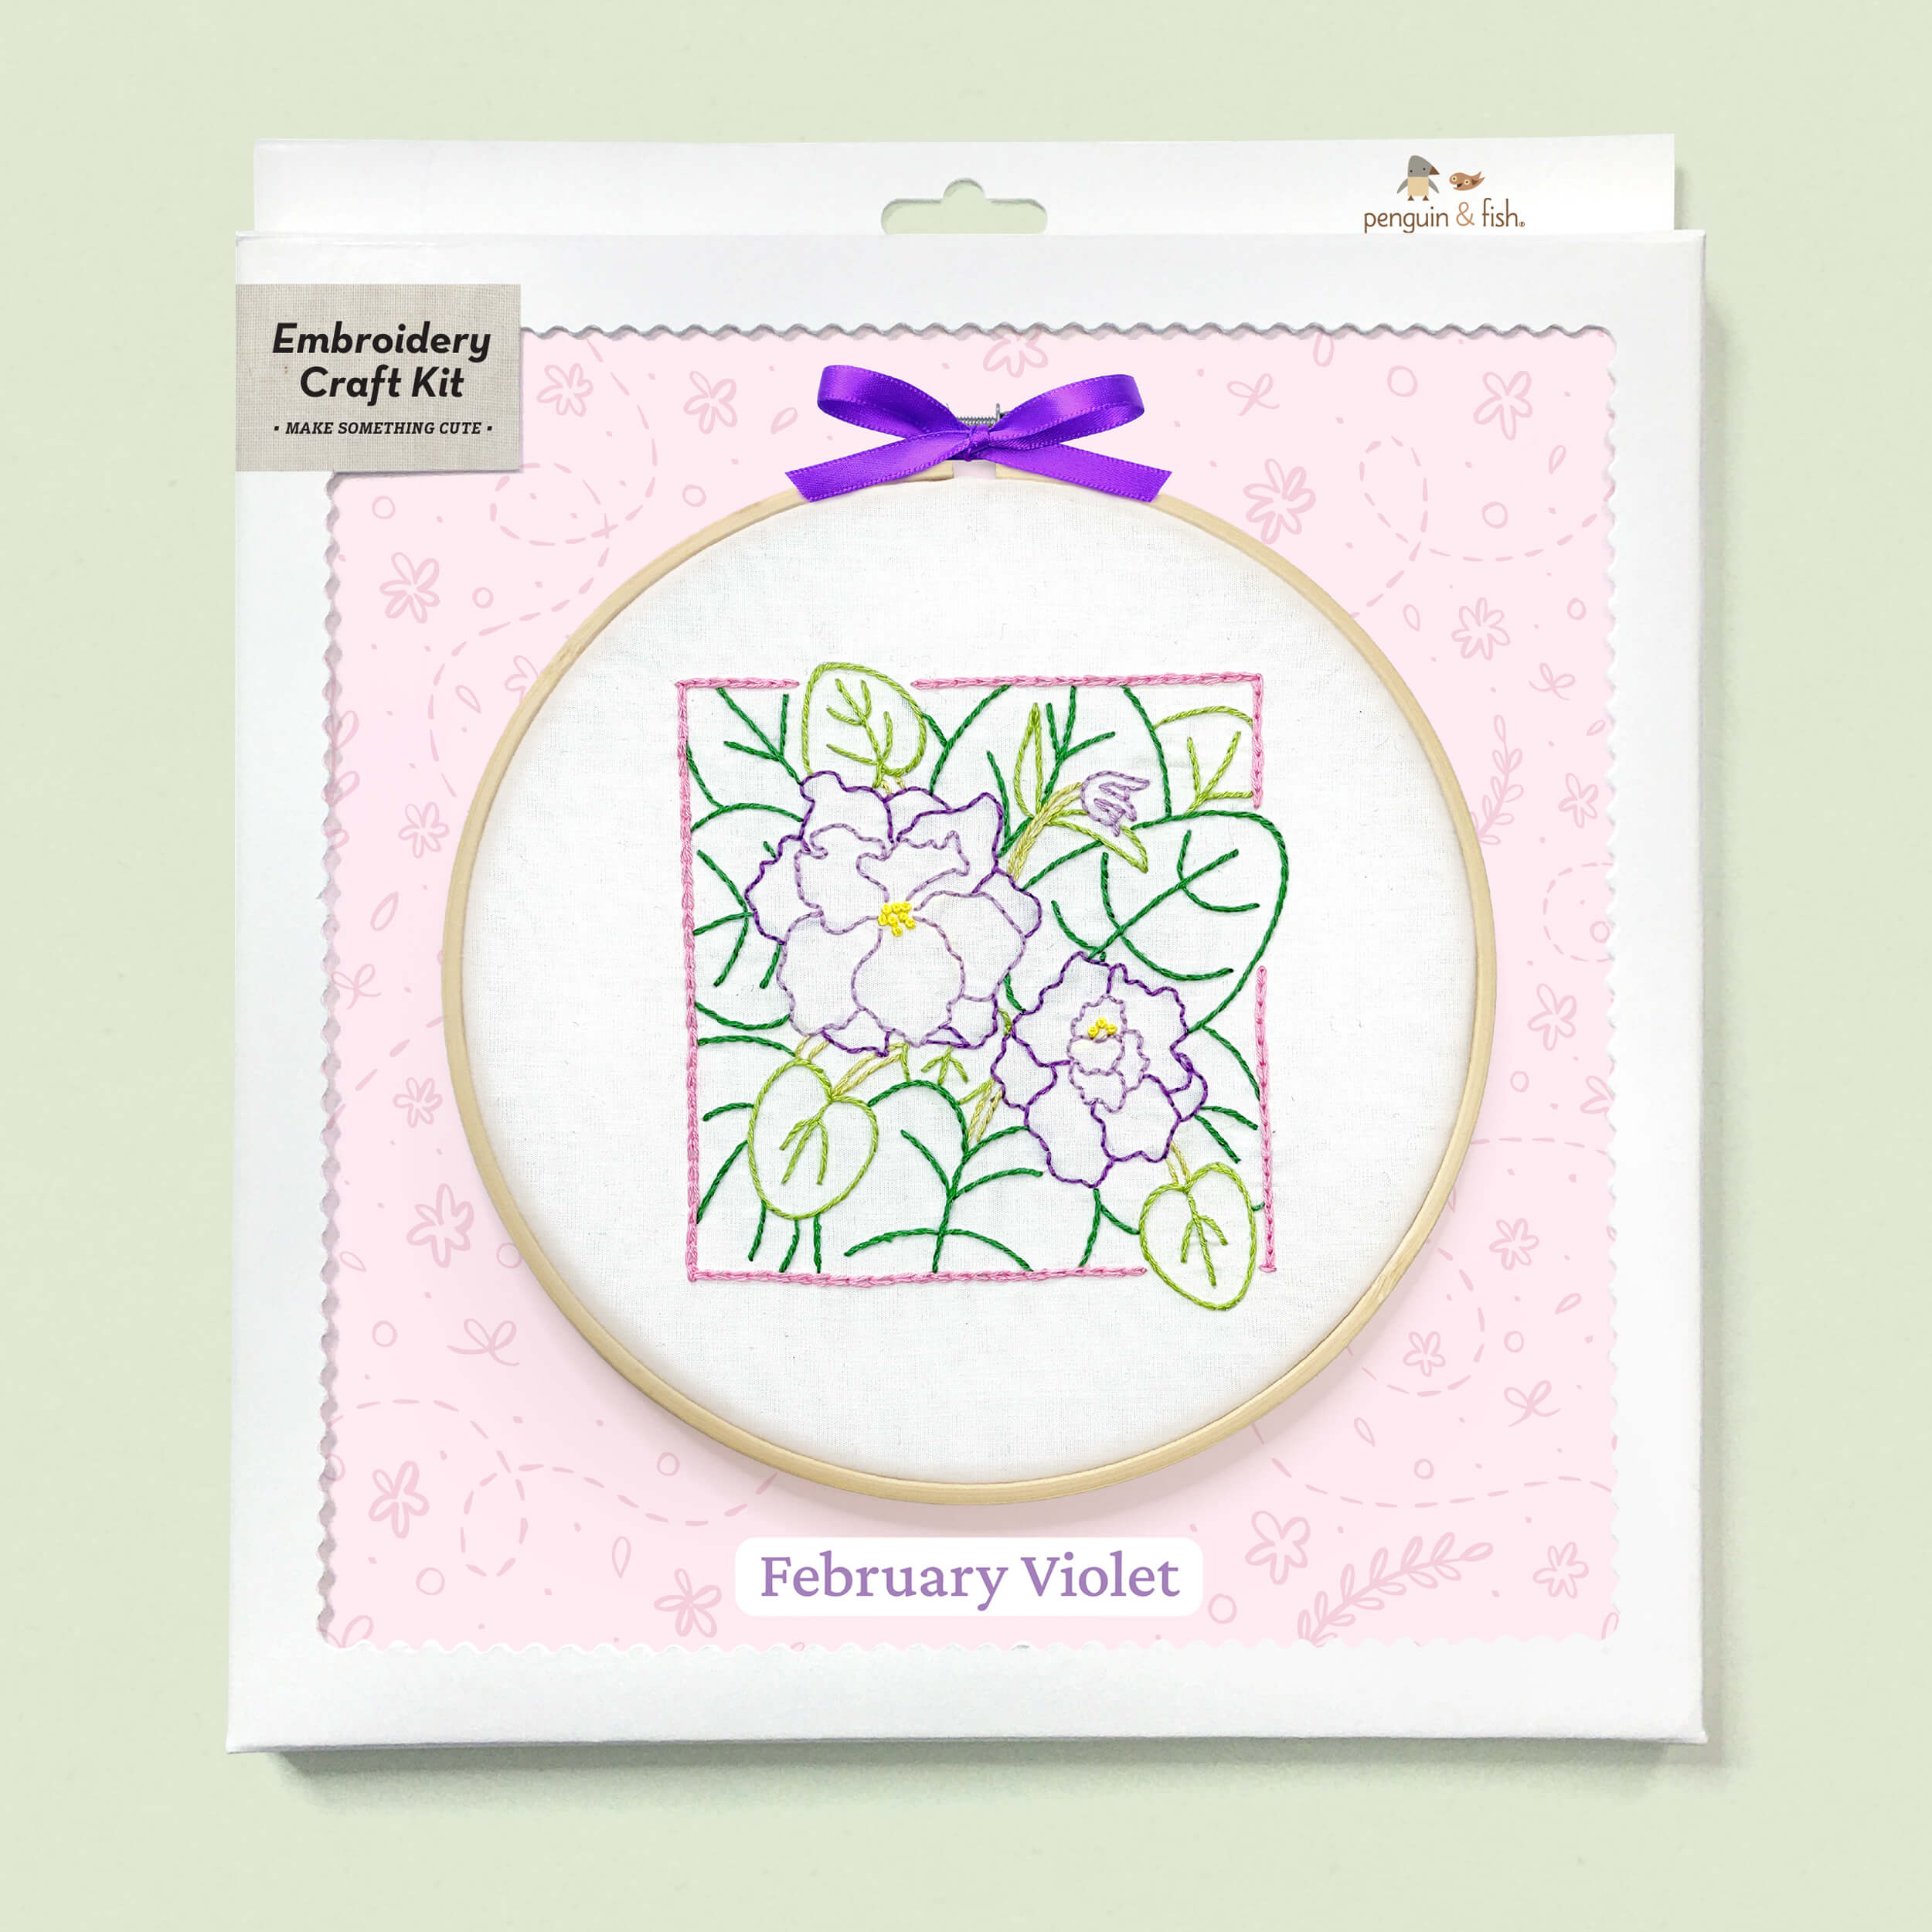 February Violet birth flower embroidery kit in a box